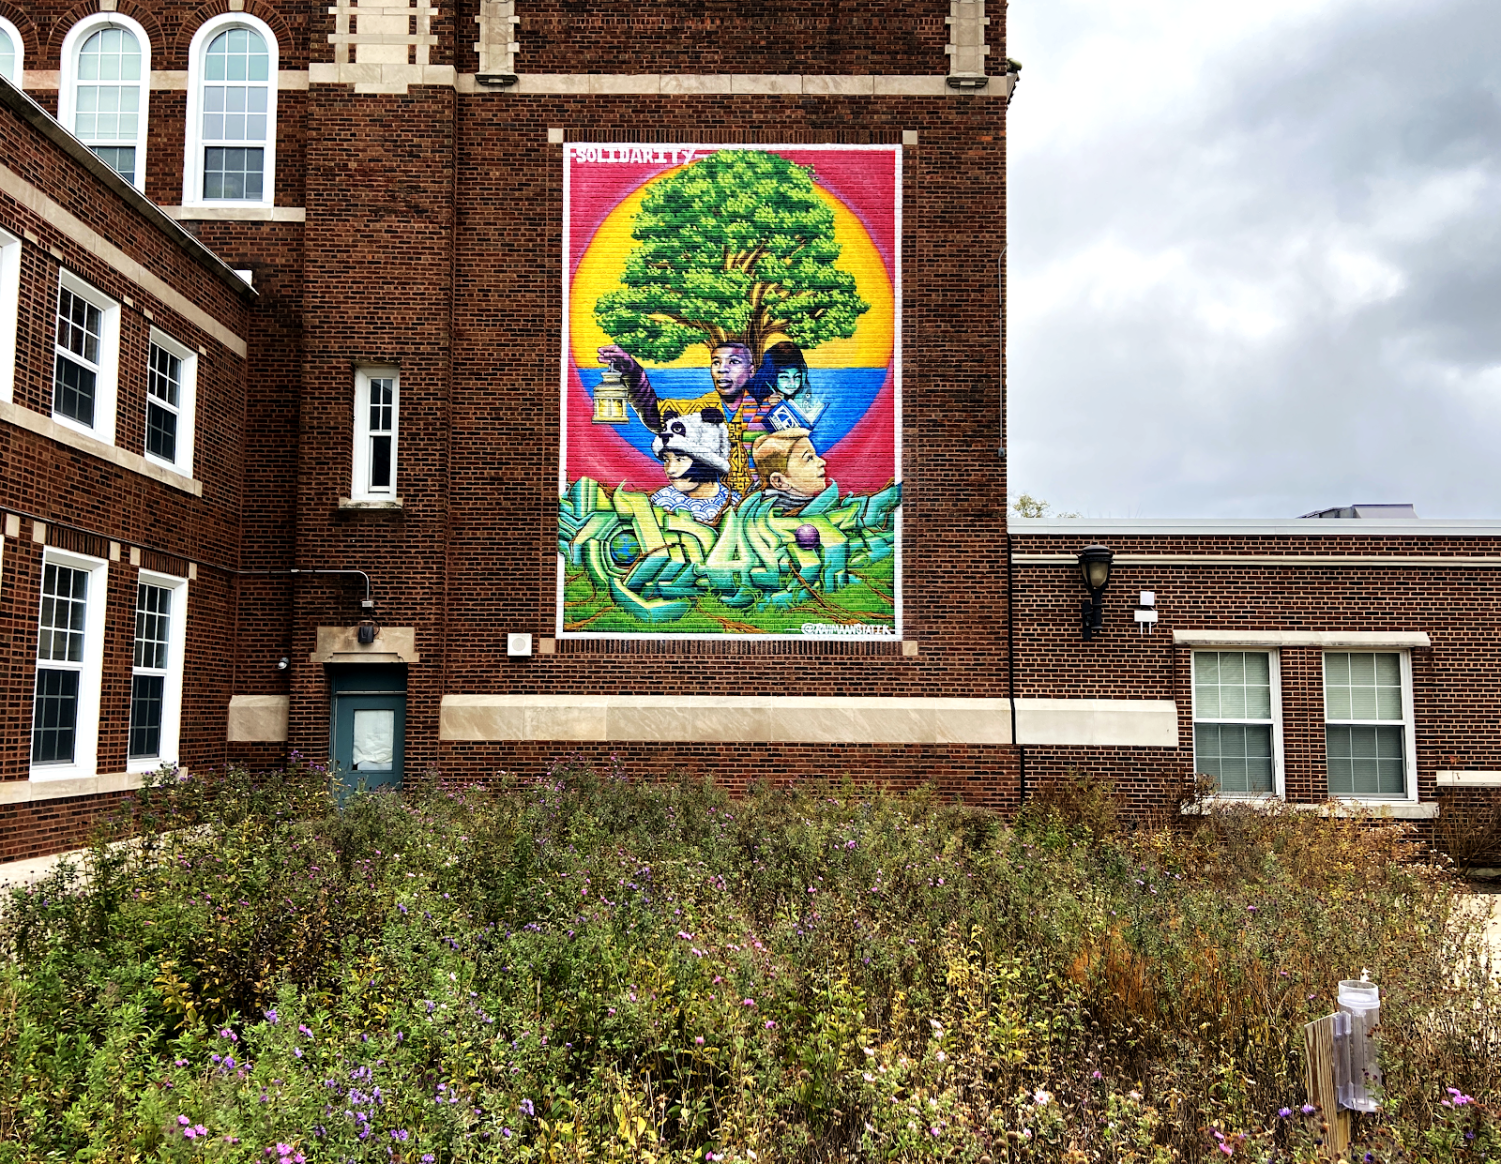 A mural appears on the side of a brick building.